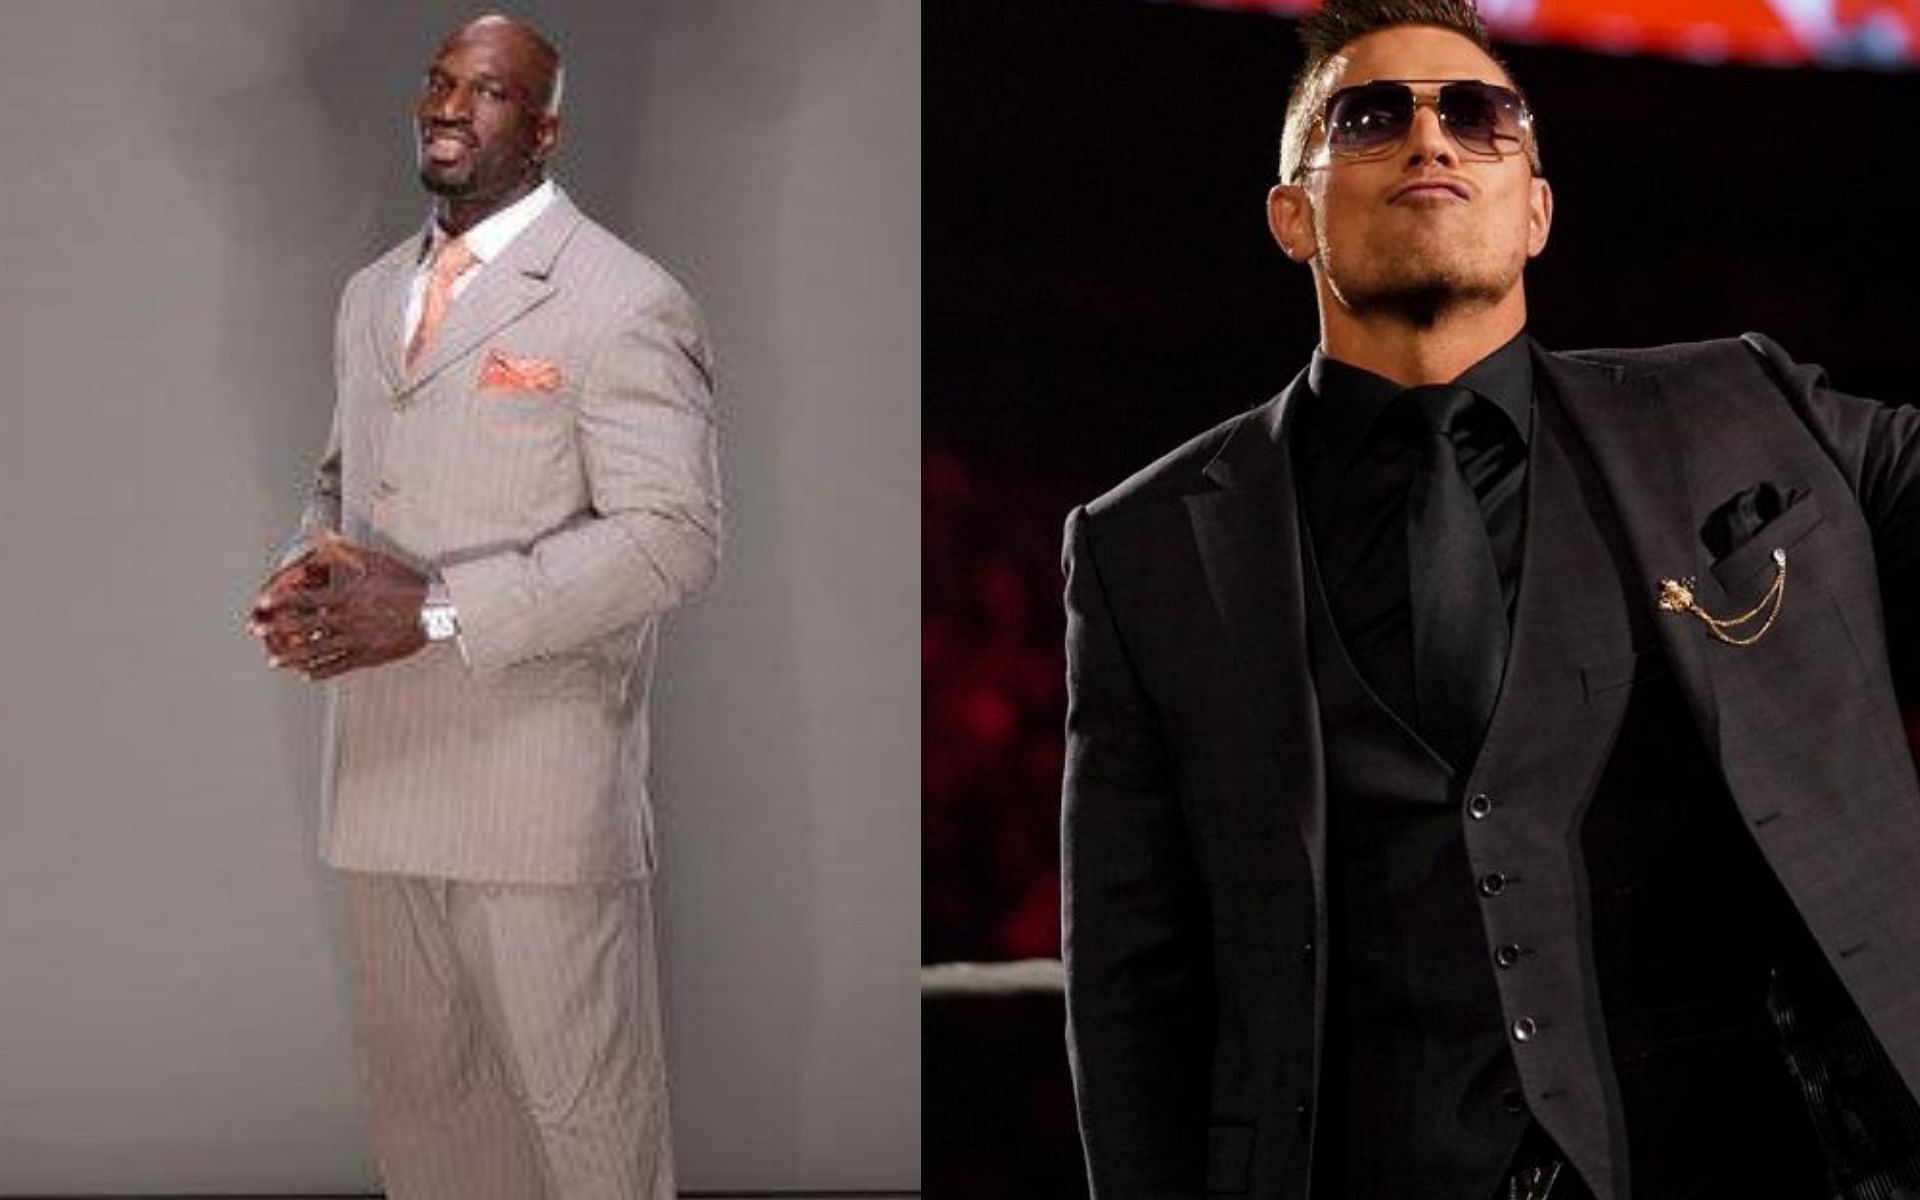 Titus O&#039;Neil and The Miz have represented the WWE at out-of-ring events.